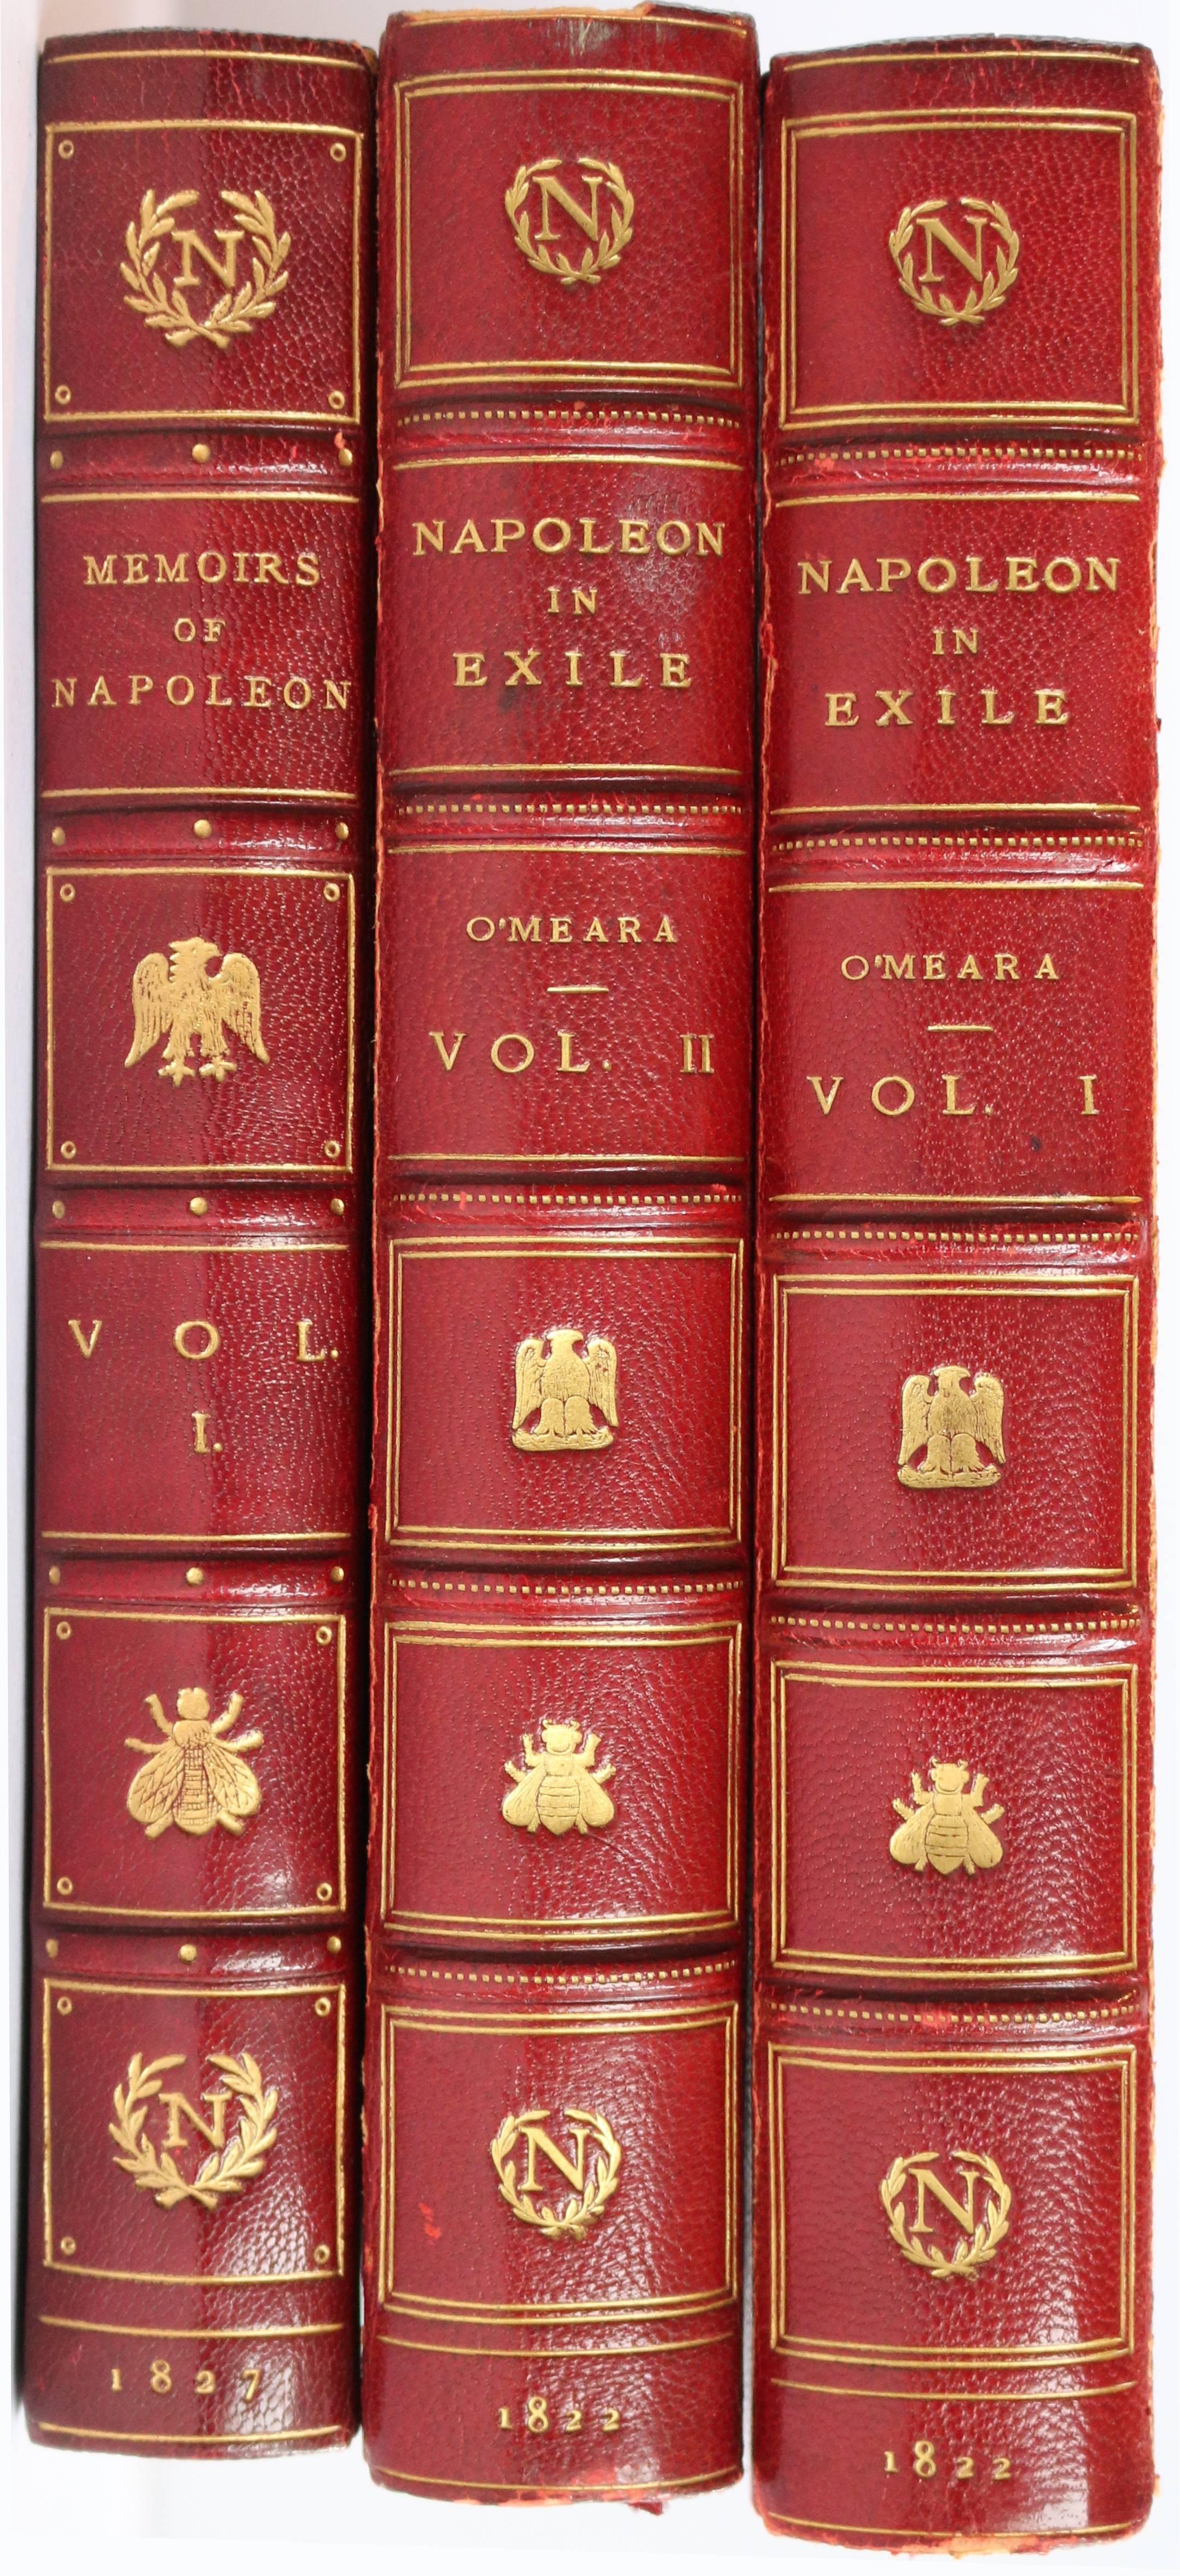  Napoleon Bonaparte: Assorted Book Collection From 1811 - 1924 13